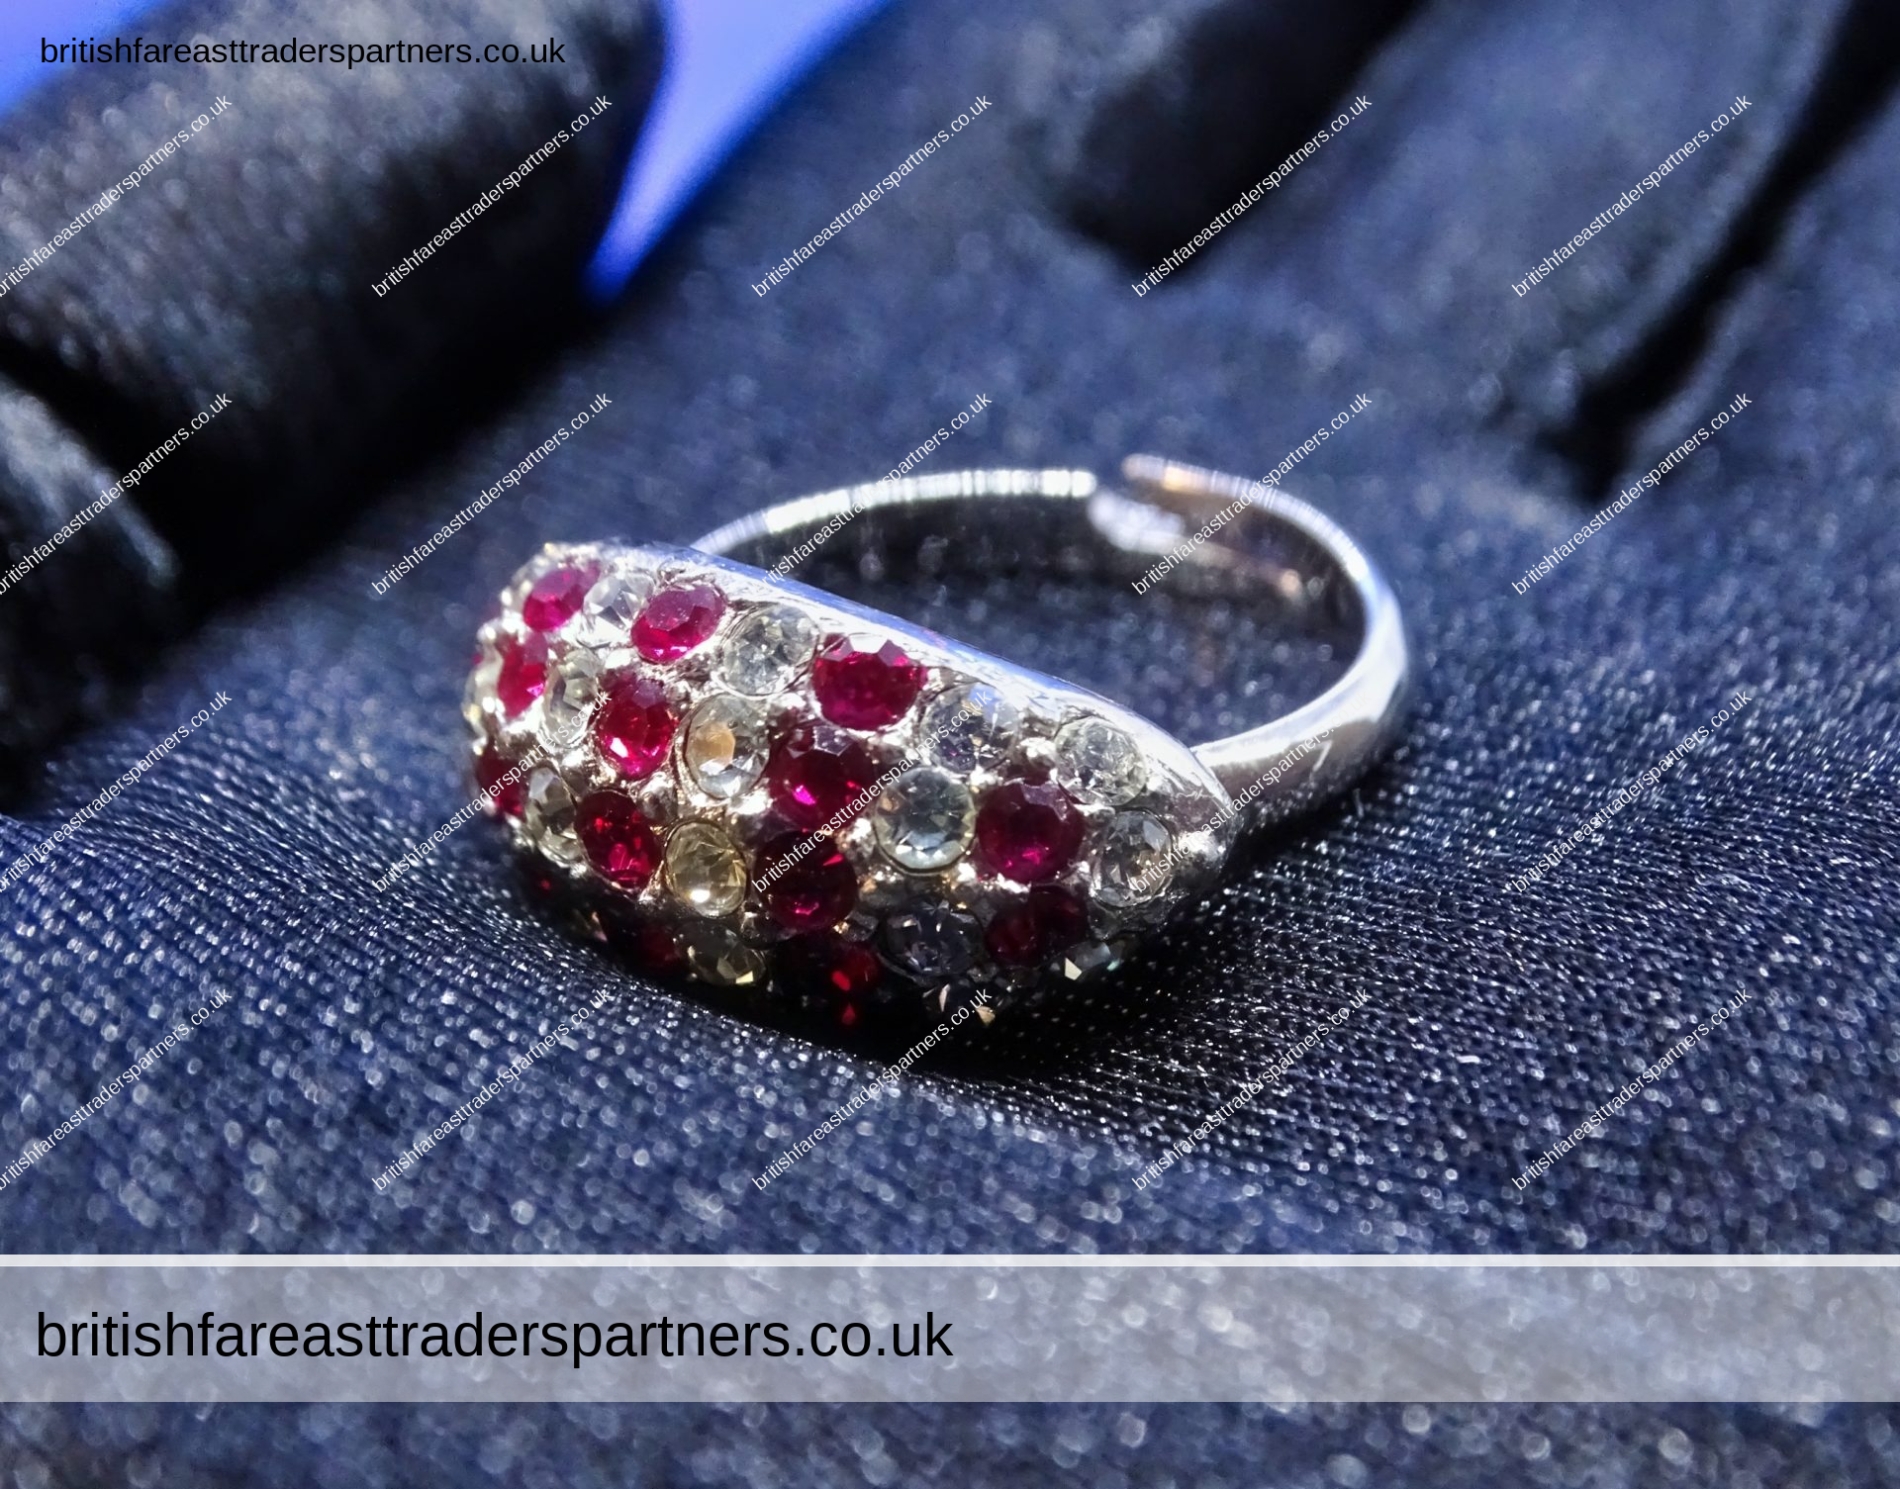 SPARKLY COCKTAIL RING FAUX RUBY & RHINESTONES ADJUSTABLE | COCKTAIL / STATEMENT RINGS |  PARTY | NIGHT OUT | DATE NIGHT | COSTUME JEWELLERY | FASHION | LIFESTYLE